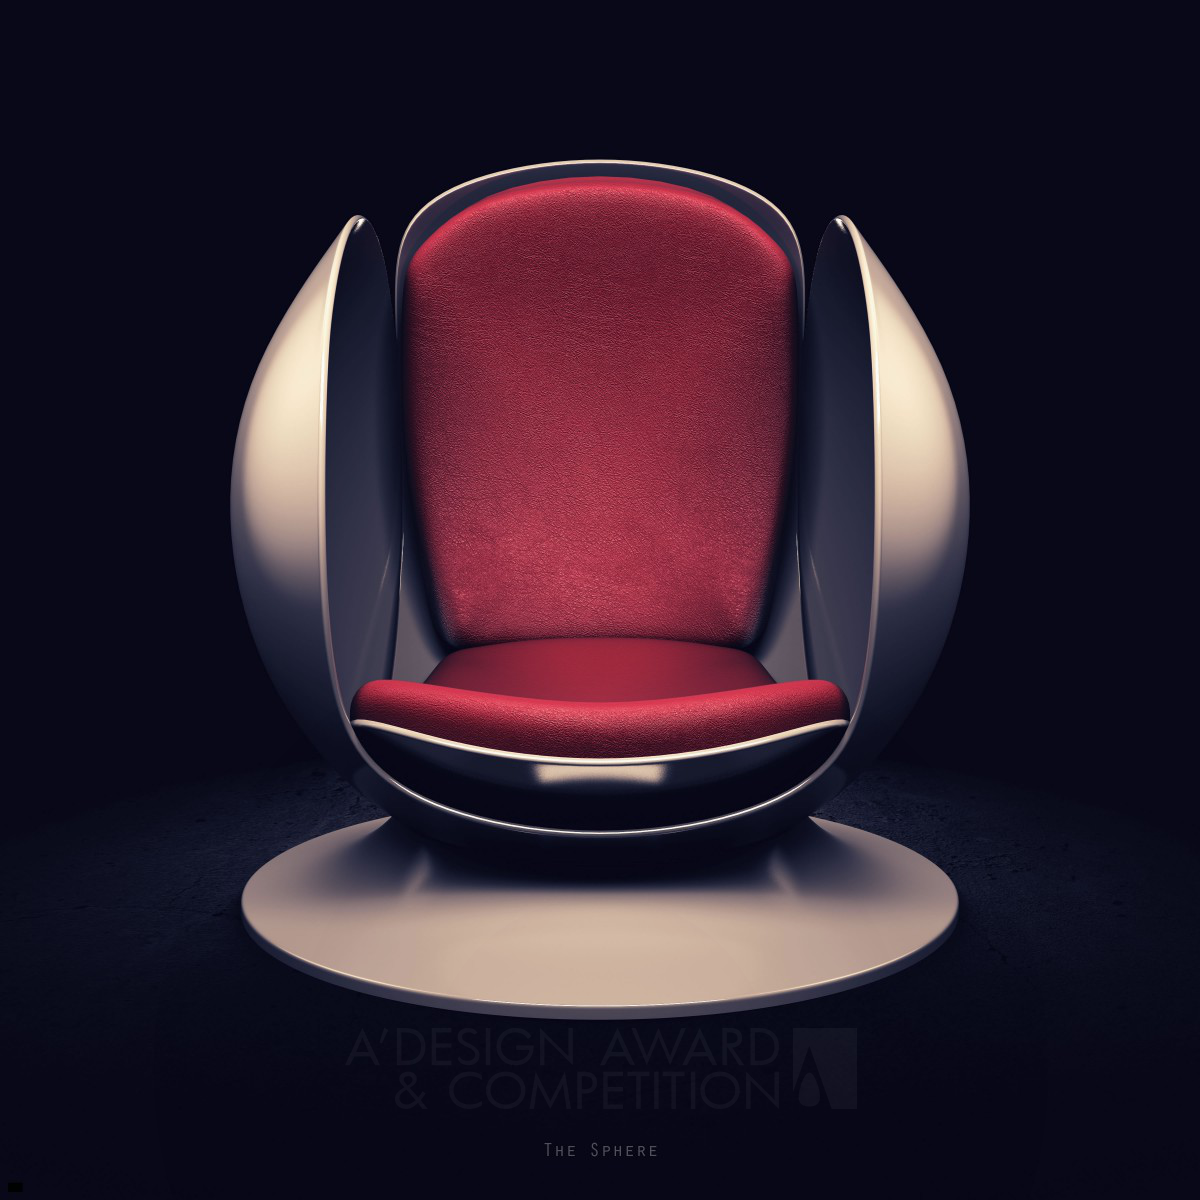 The Sphere Concept Chair by Gregory J Holmes